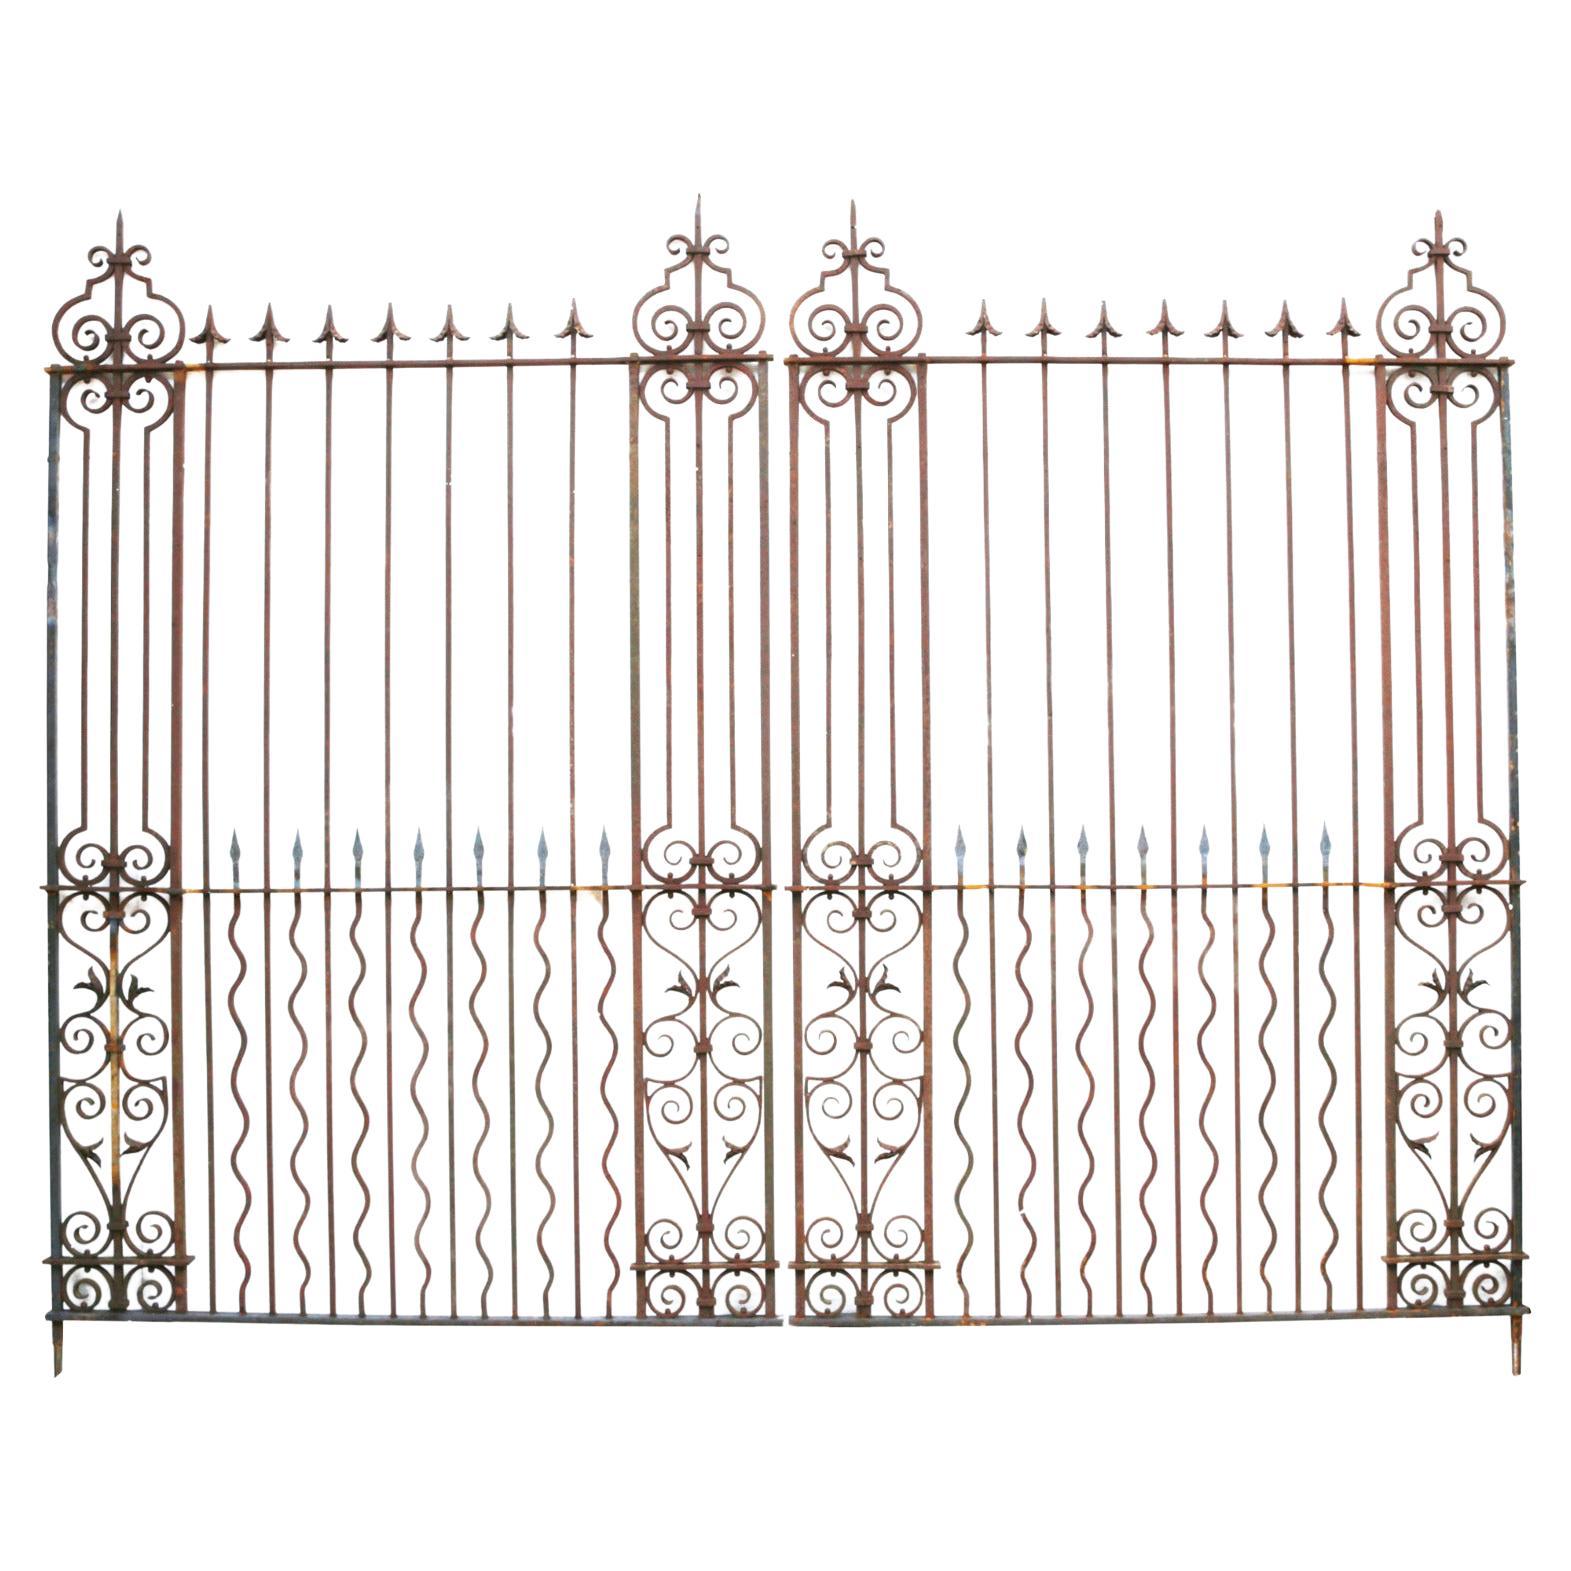 Pair of Grand Wrought Iron Driveway Gates